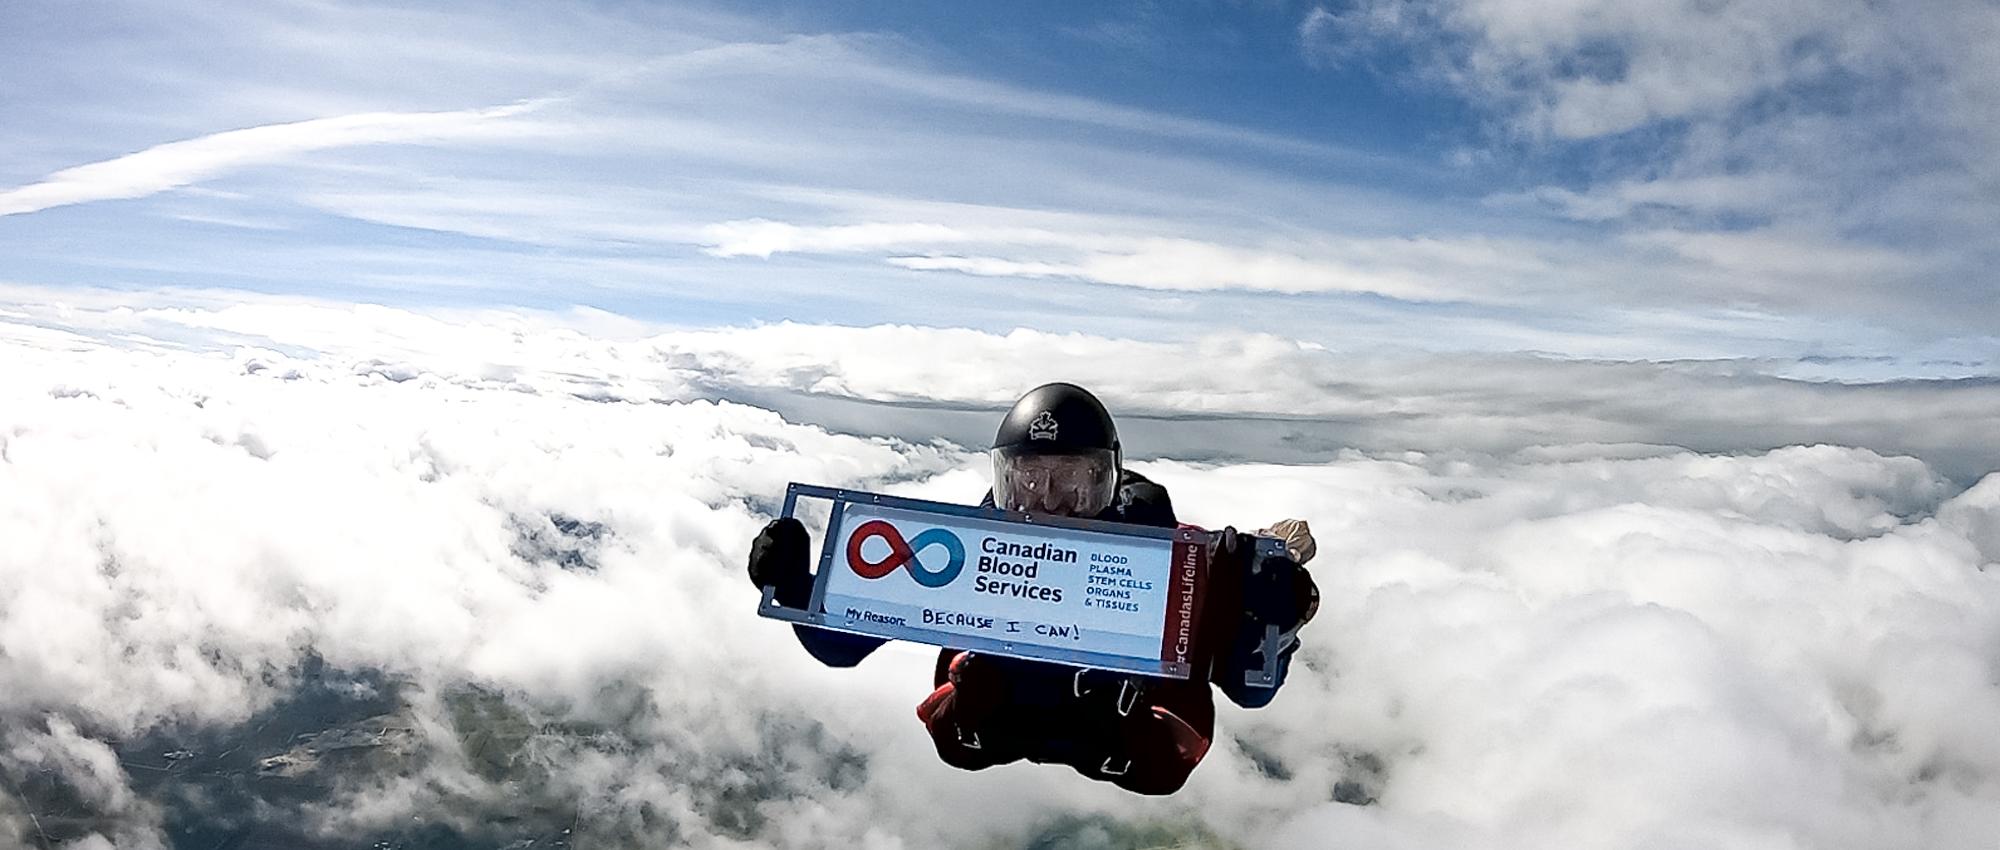 Big Image of Ian Harrop holding up a sign of Canadian Blood Services of his 600th blood donation while skydiving